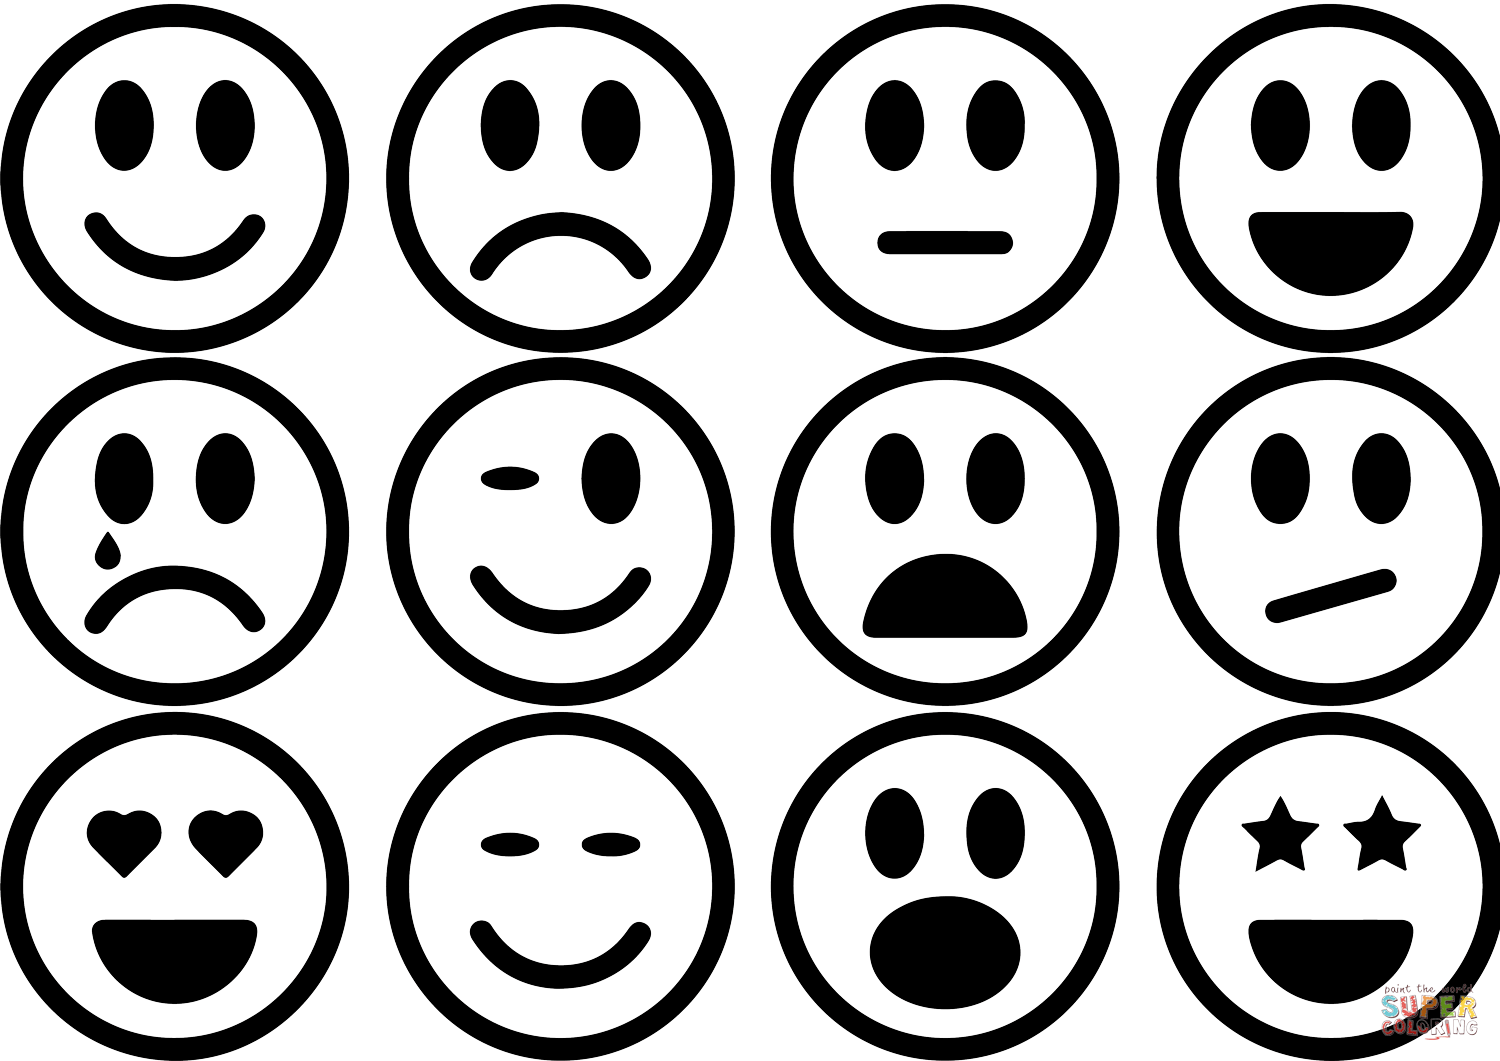 Smiley face emotion mood chart coloring page free printable coloring pages